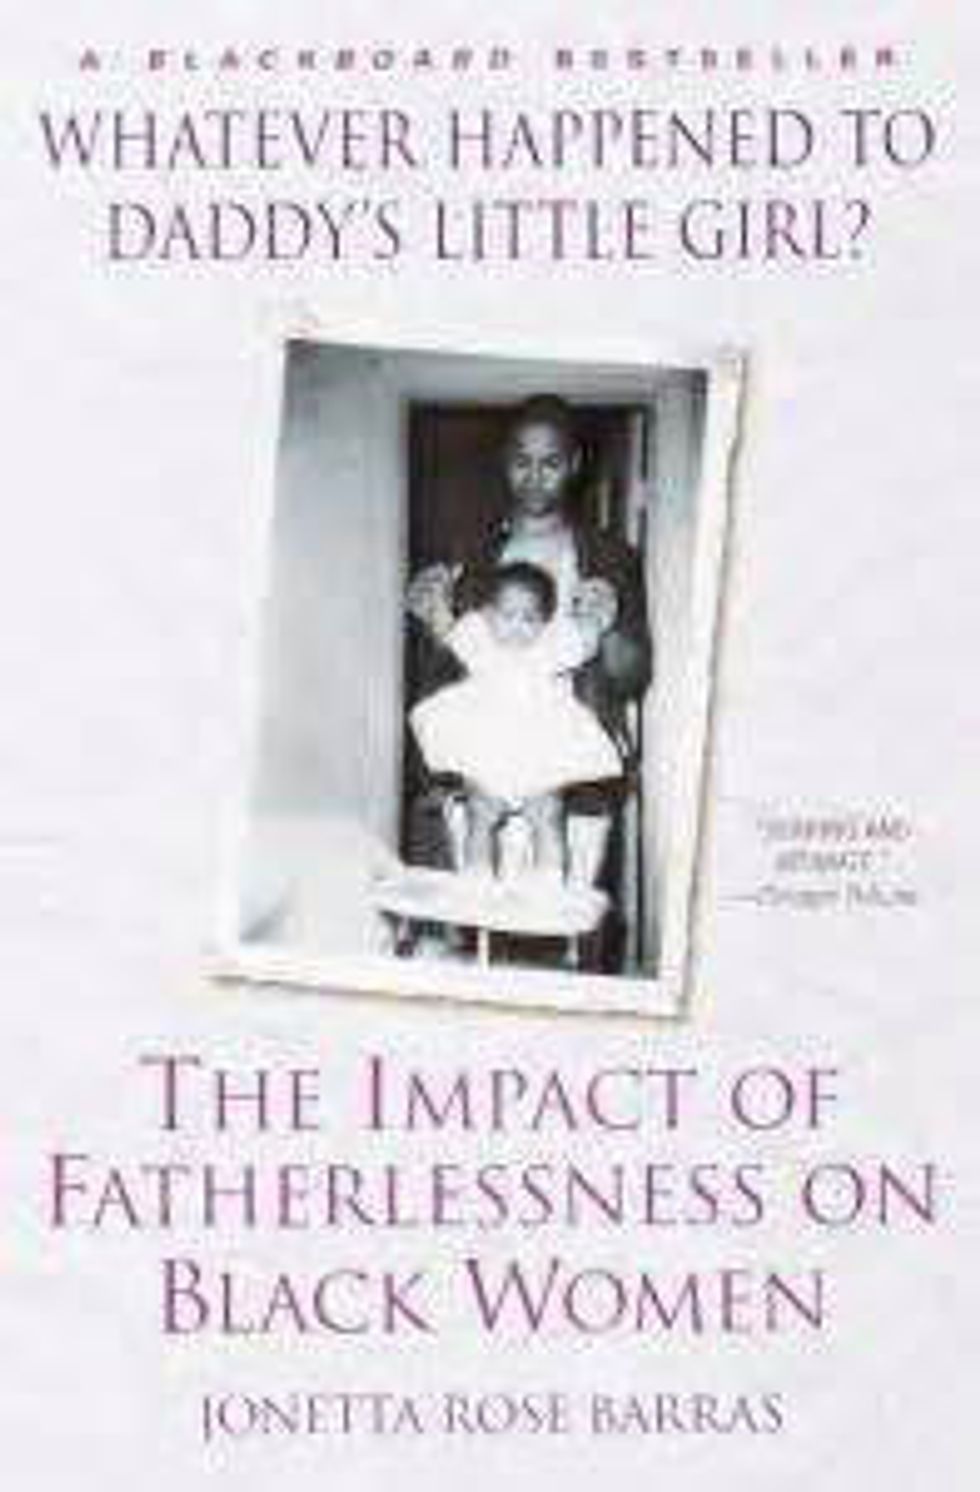 Whatever Happened to Daddy's Little Girl?: The Impact of Fatherlessness on Black Women by Jonetta Rose Barras